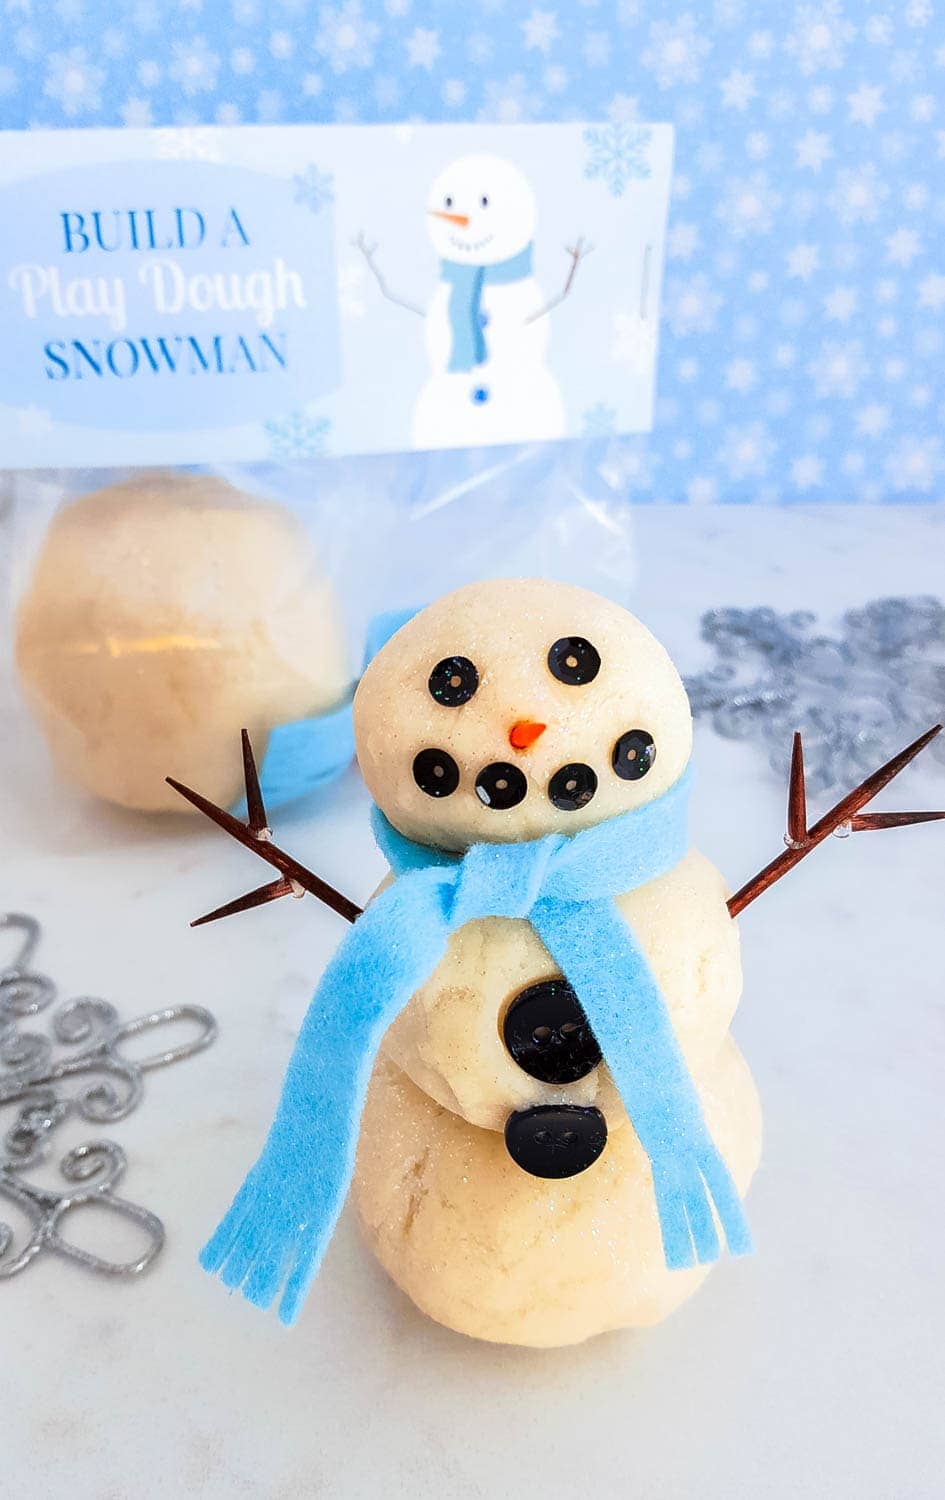 Let's Build a Snowman Kit - with FREE PRINTABLE!